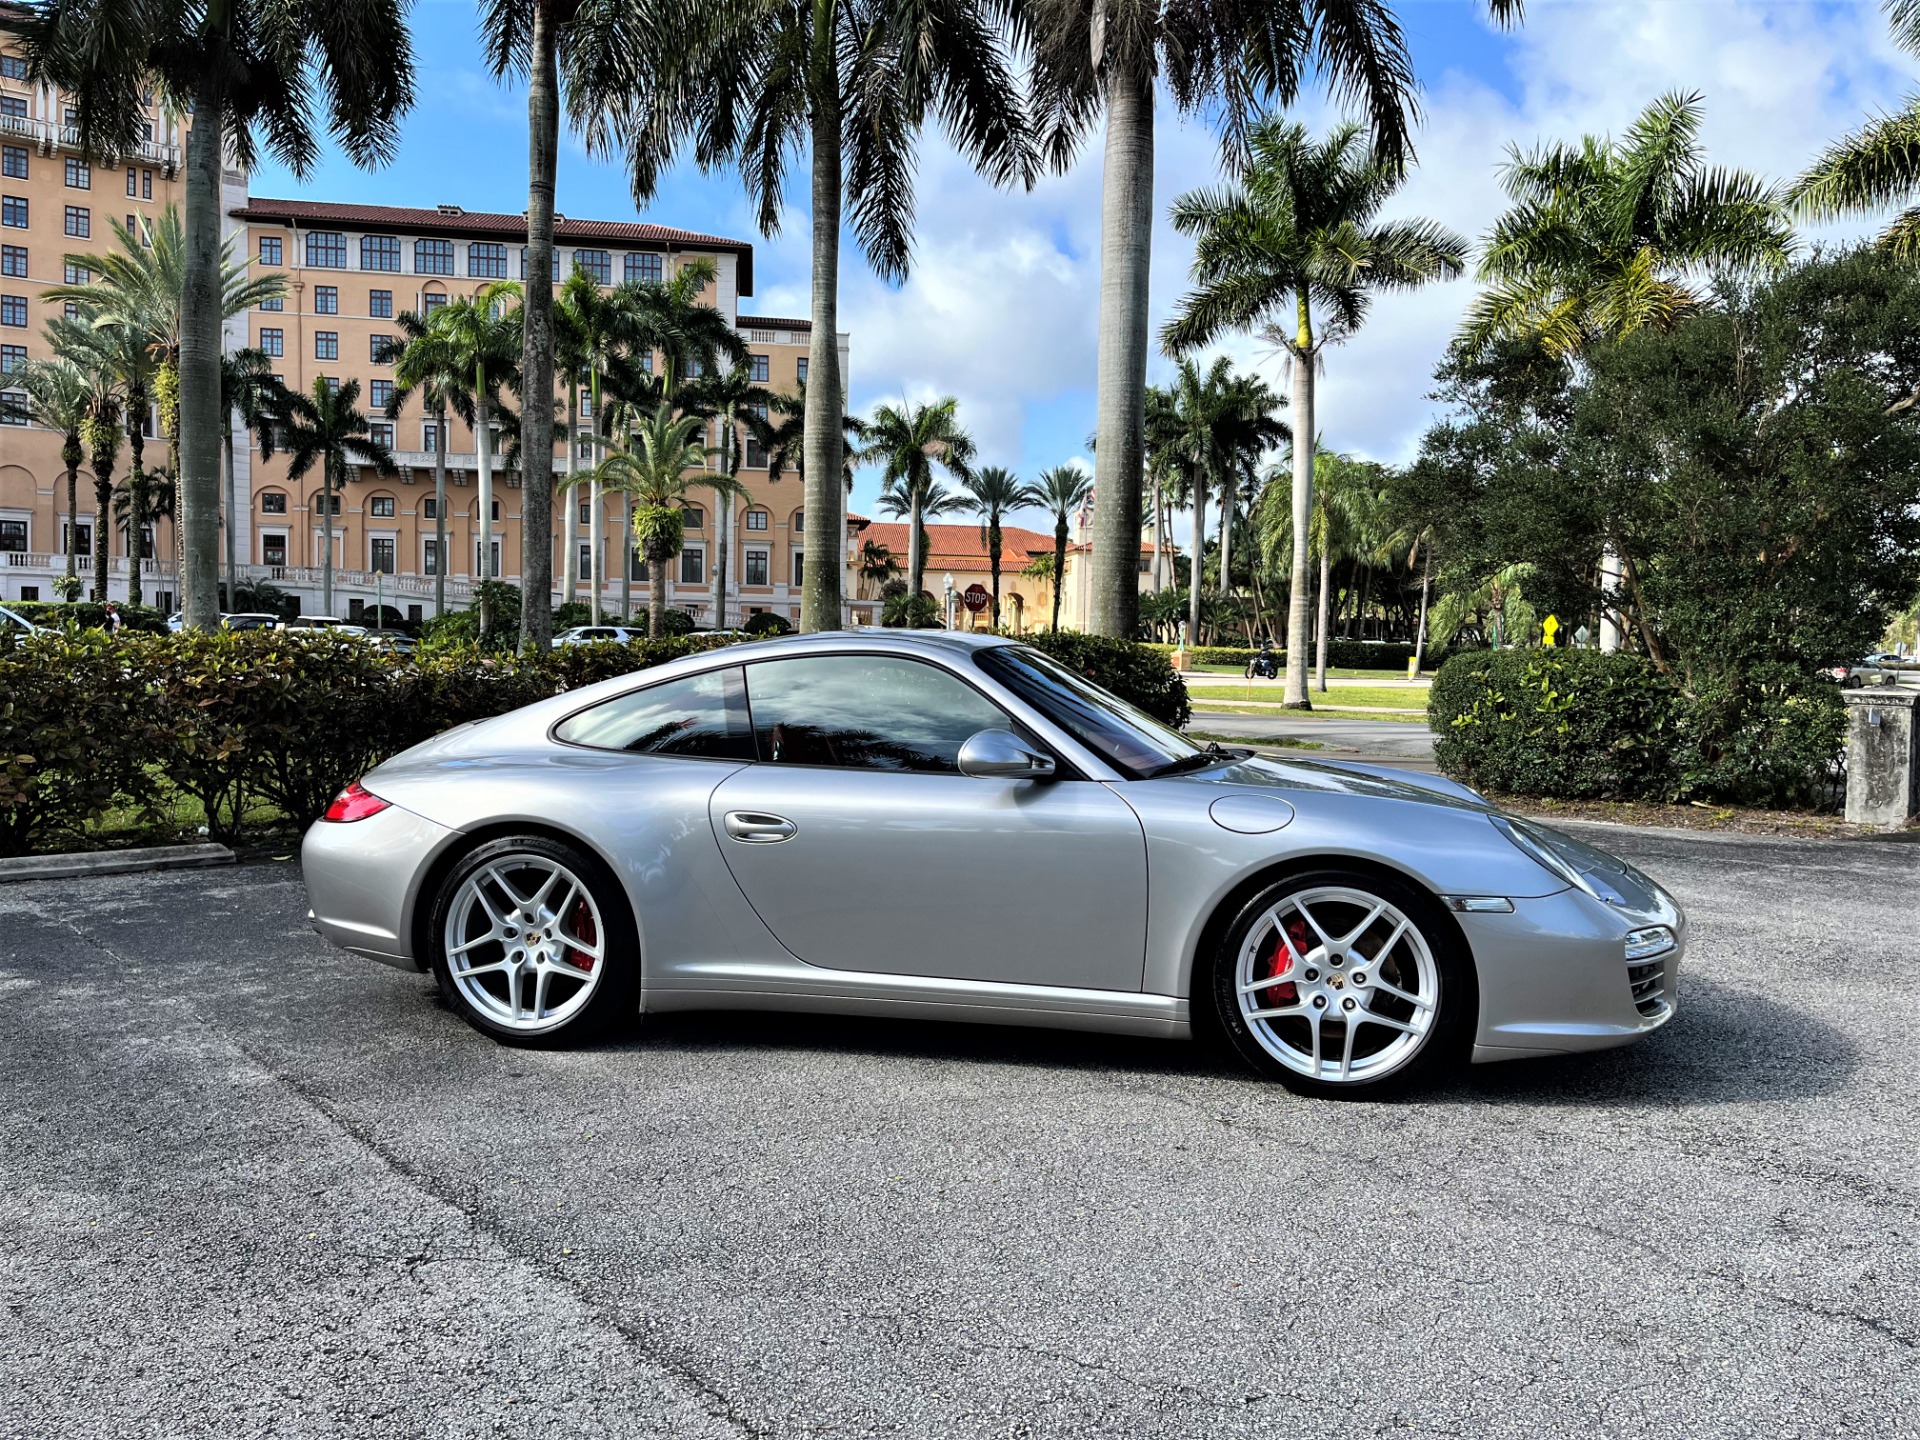 Used 2011 Porsche 911 Carrera 4S for sale Sold at The Gables Sports Cars in Miami FL 33146 4